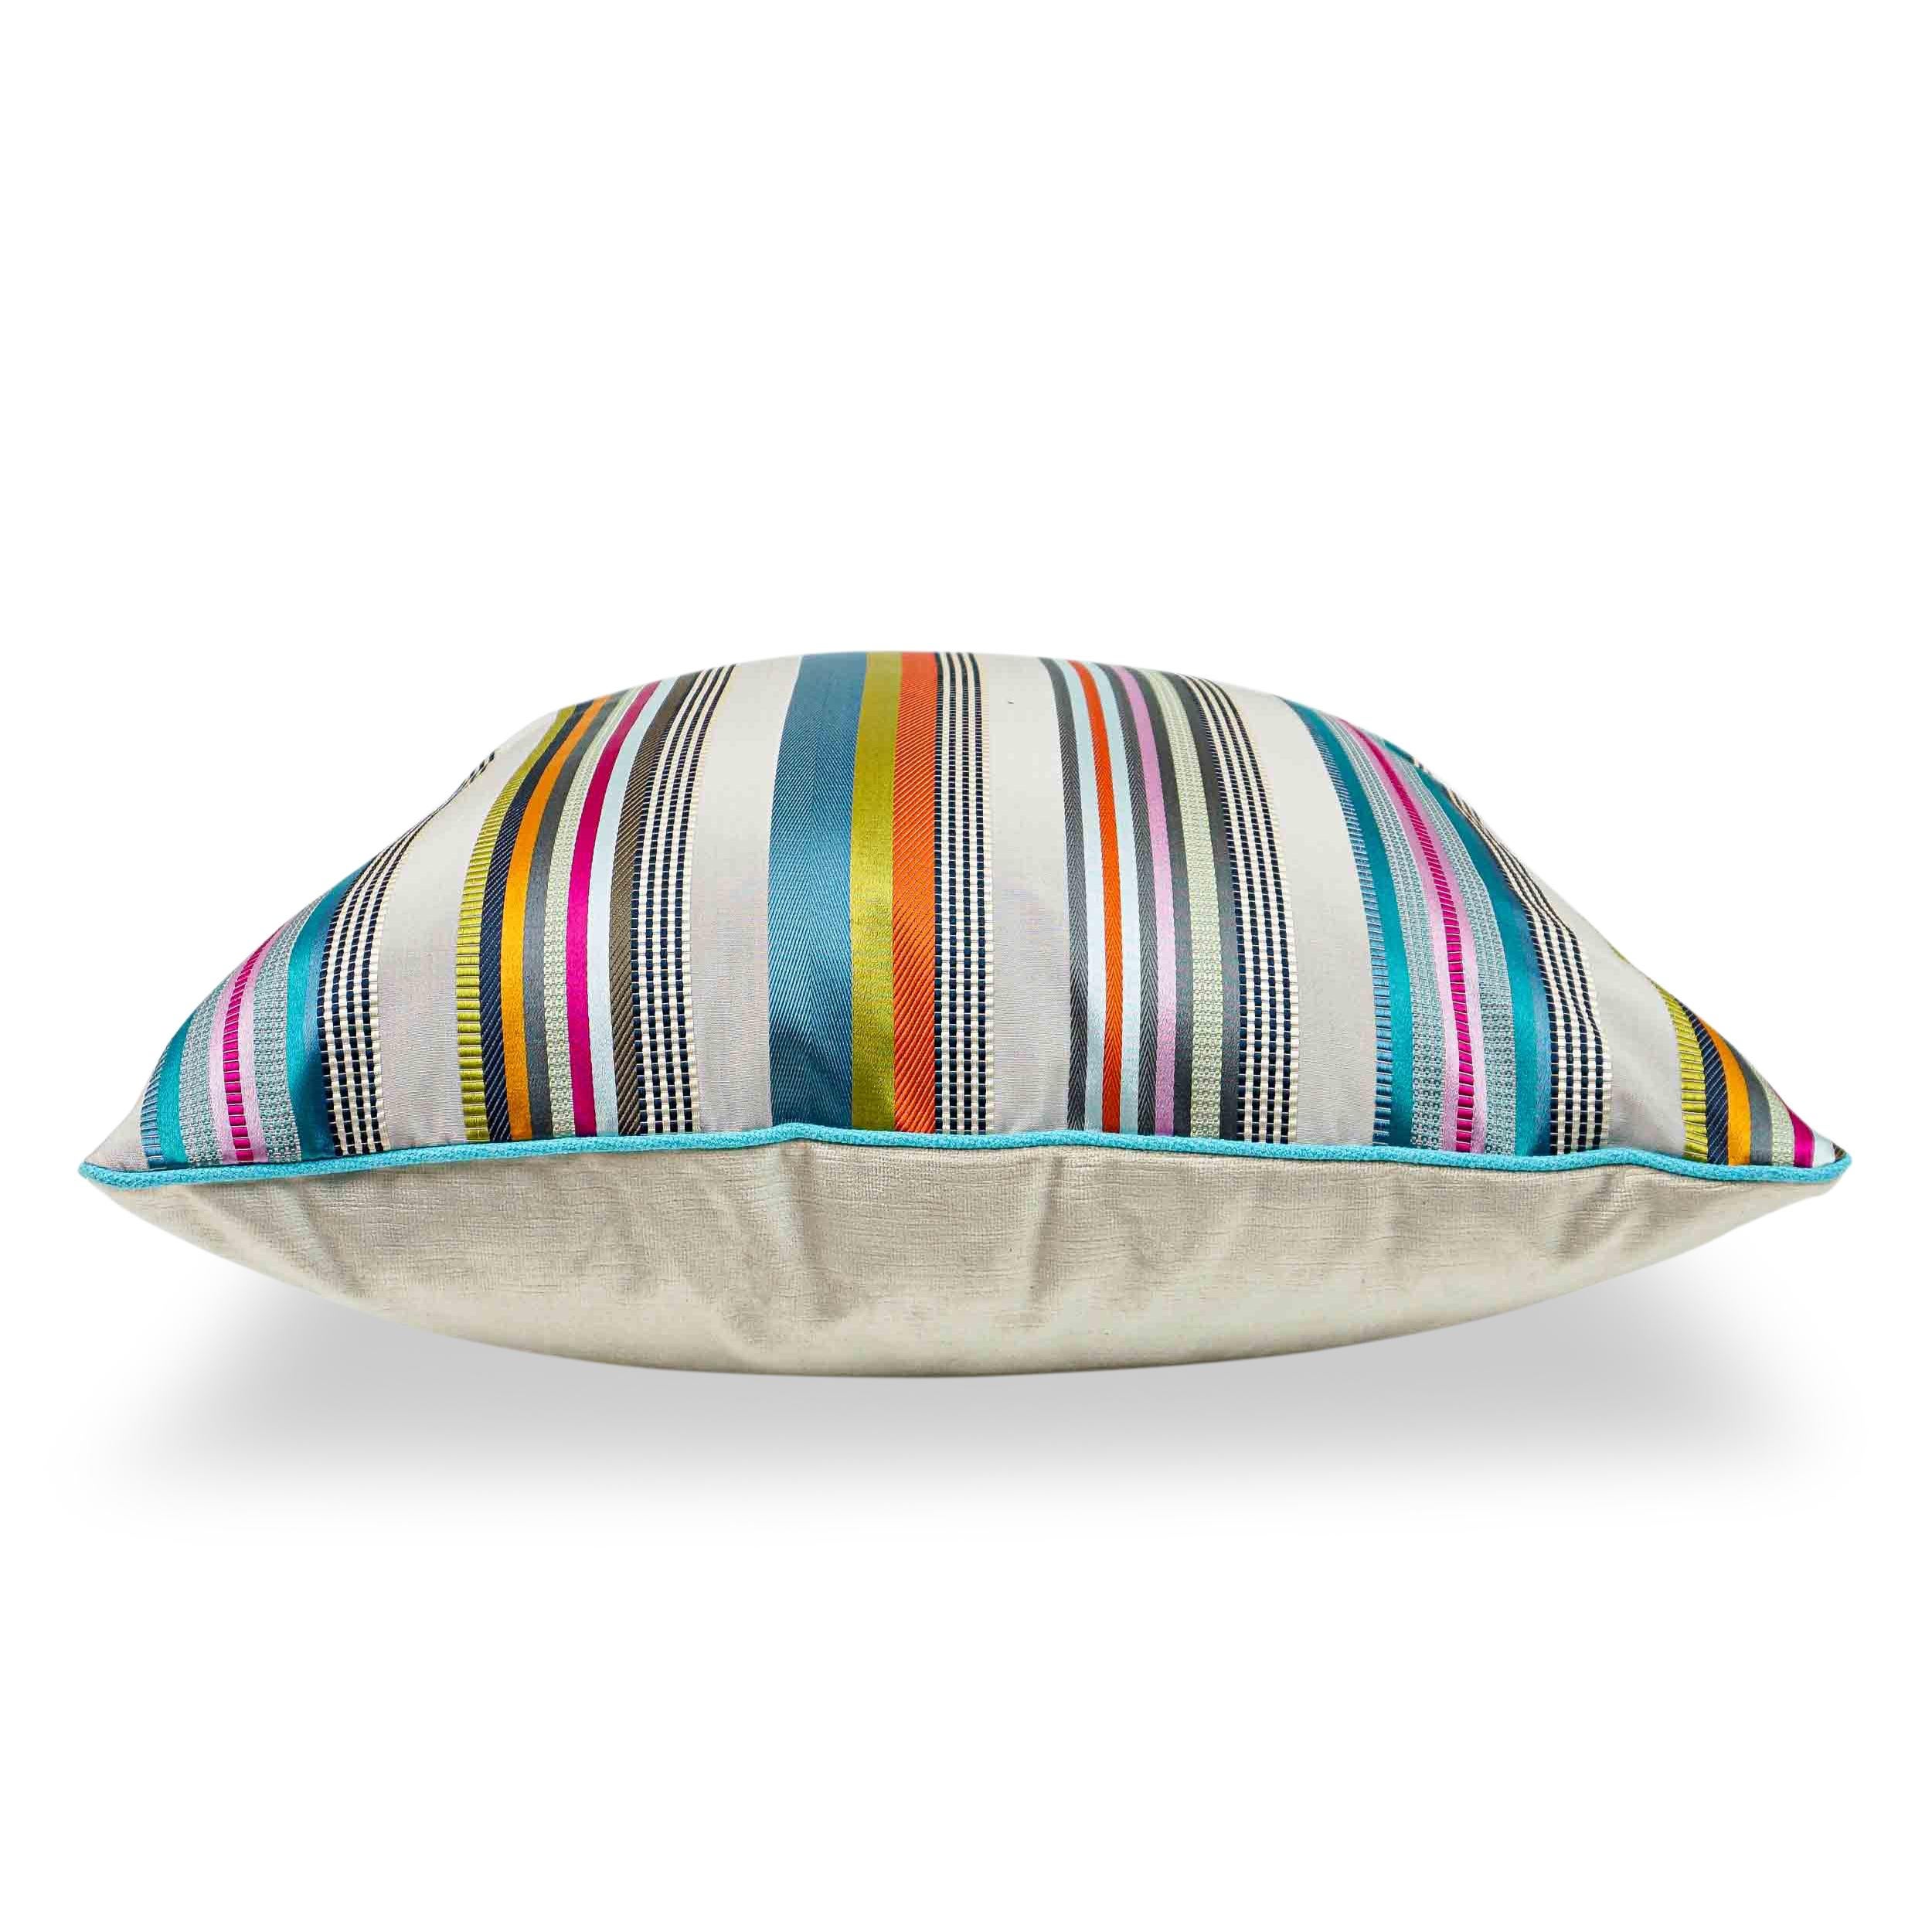 Throw Pillows with Colorful Satin Stripes For Sale 2